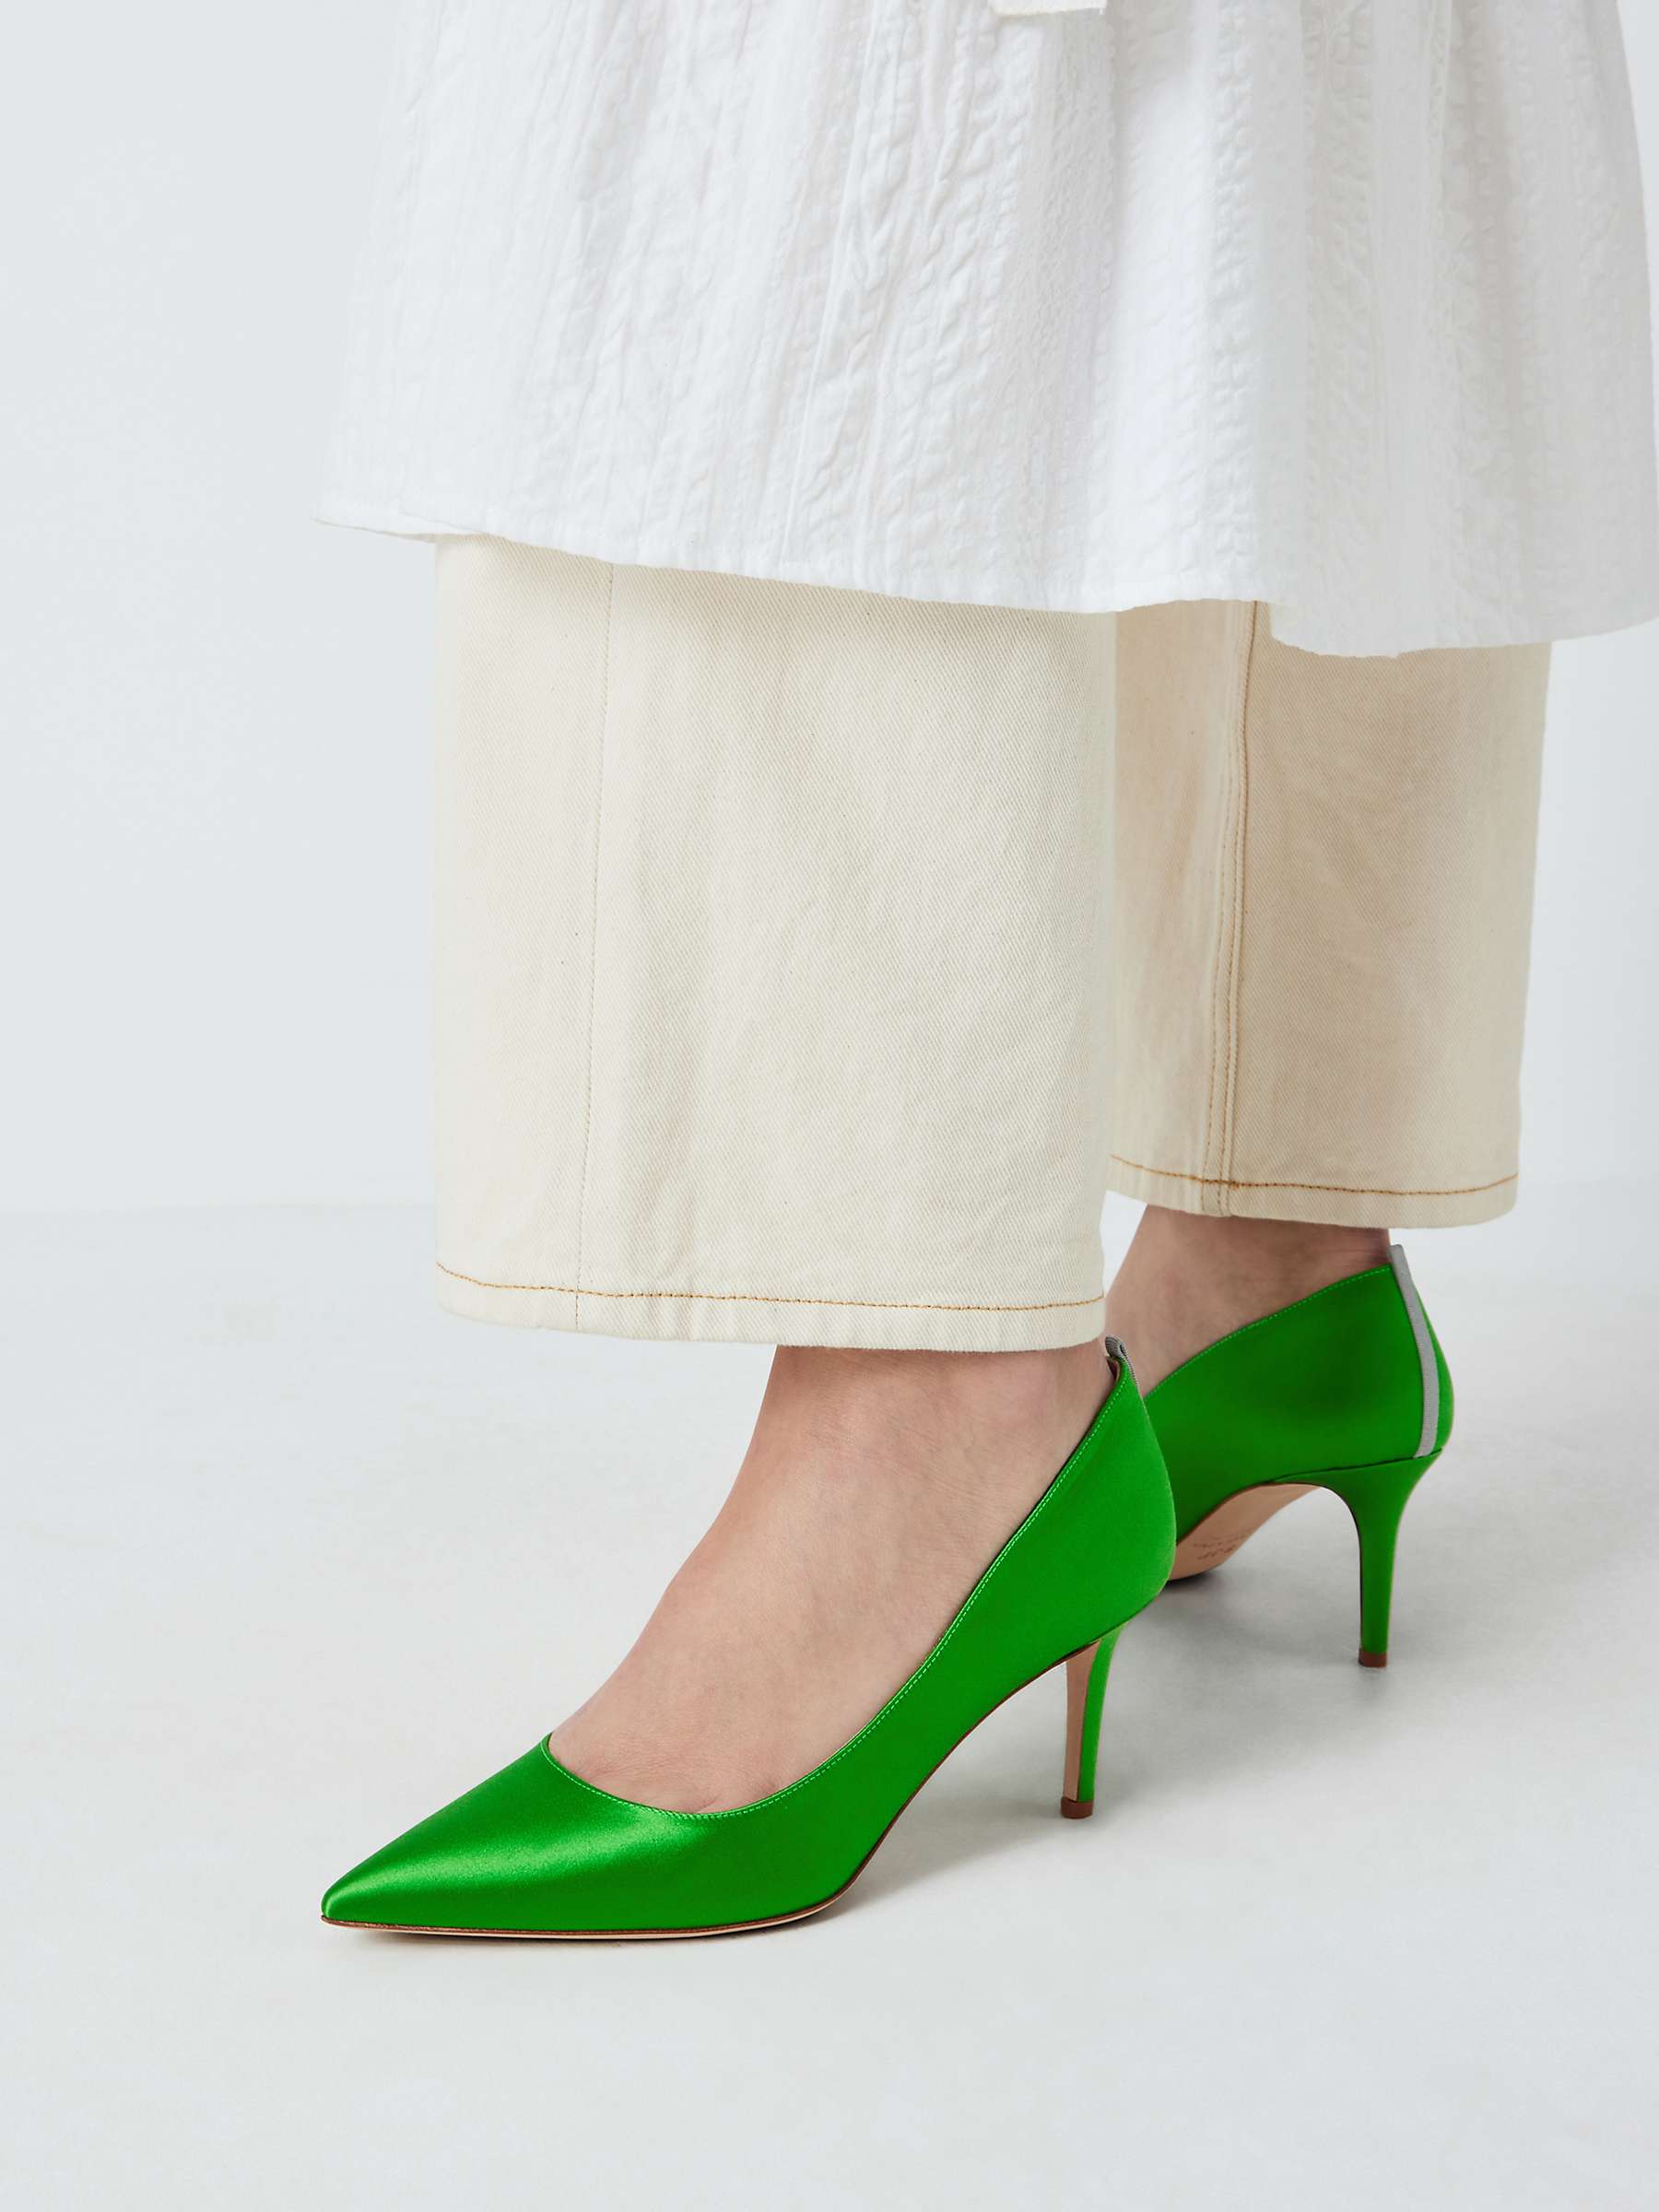 Buy SJP by Sarah Jessica Parker Fawn 70 Satin Court Shoes Online at johnlewis.com